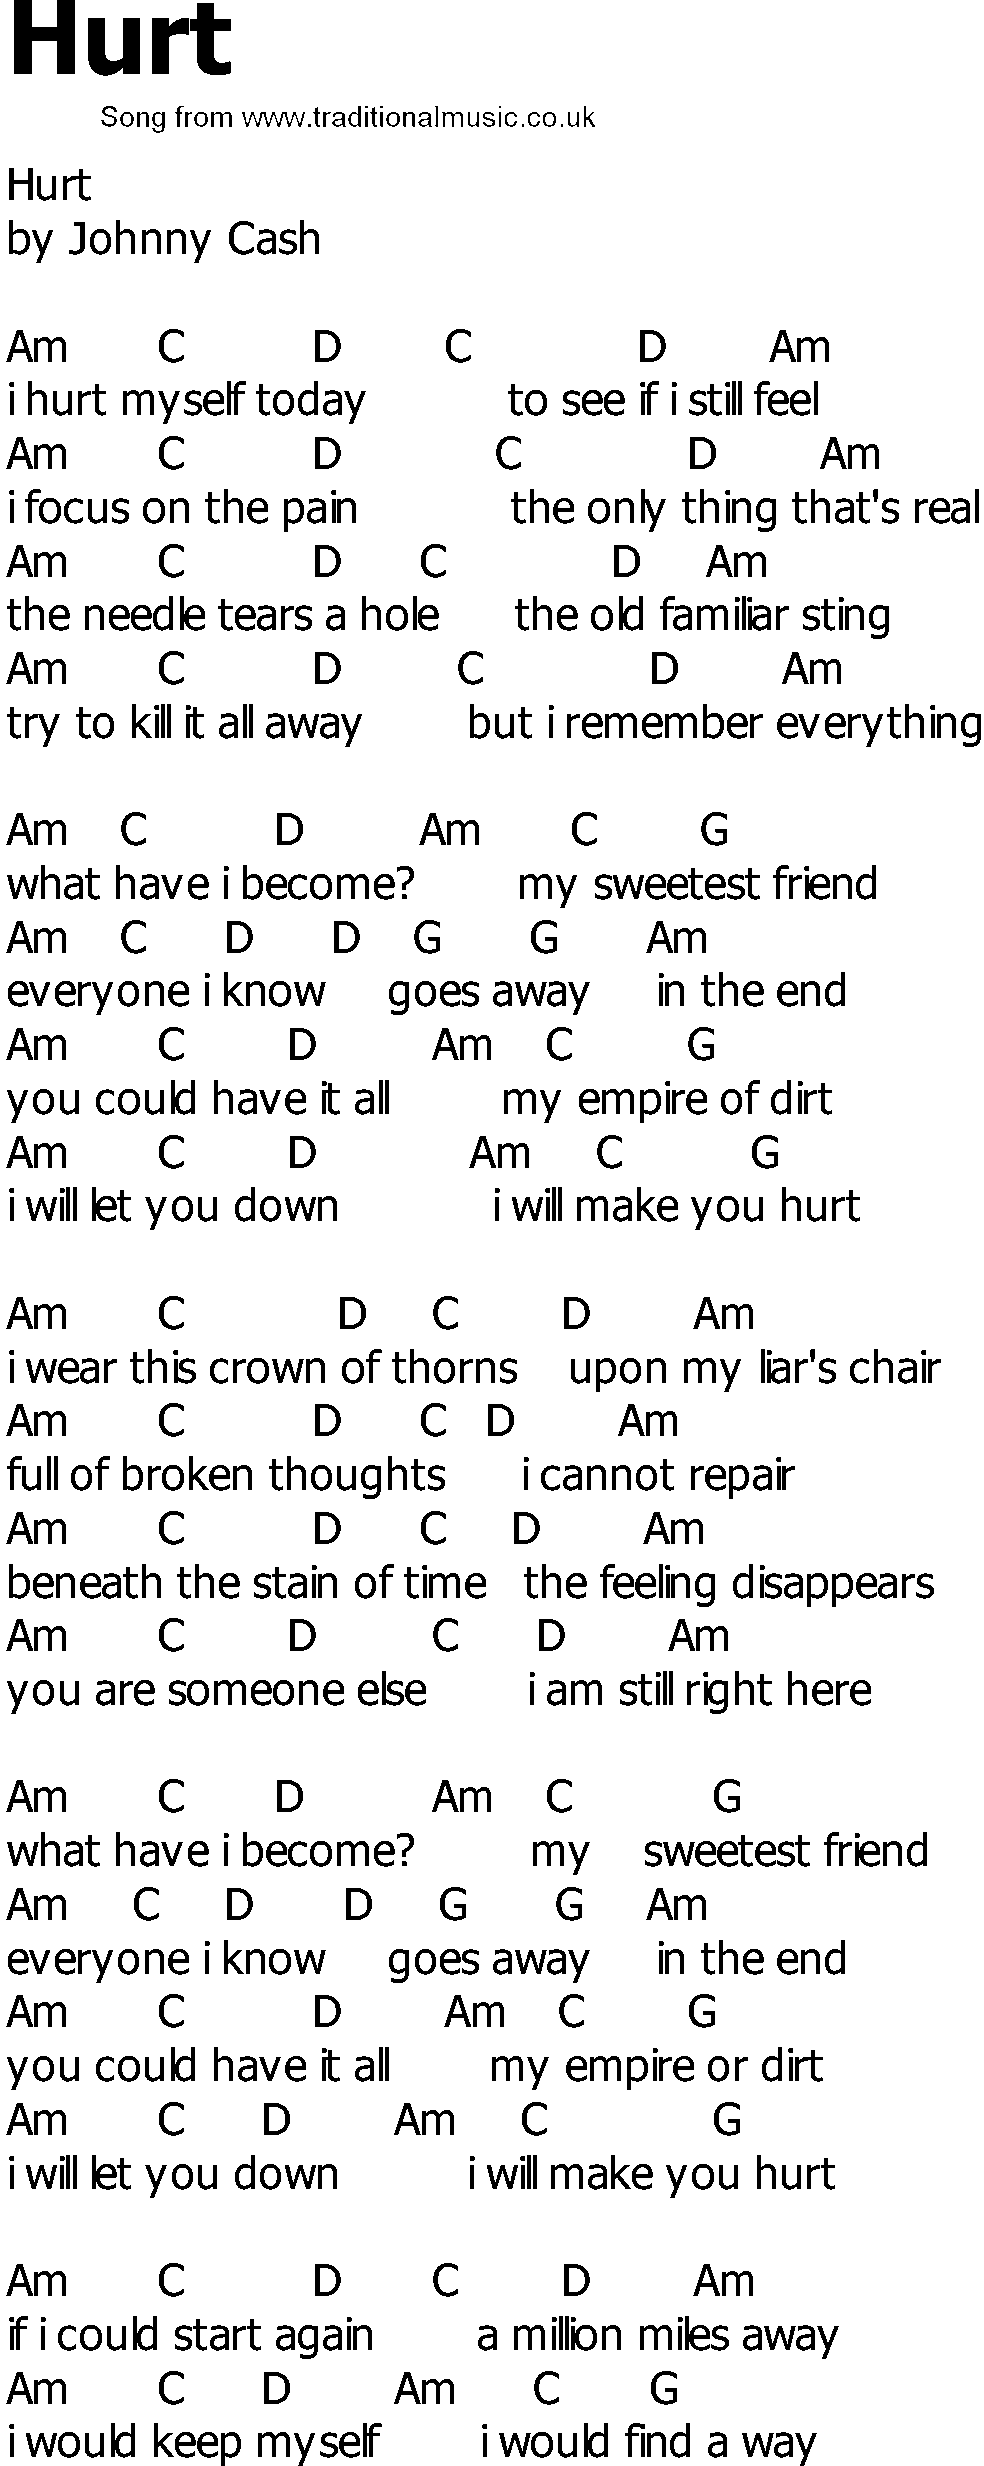 Old Country song lyrics with chords - Hurt